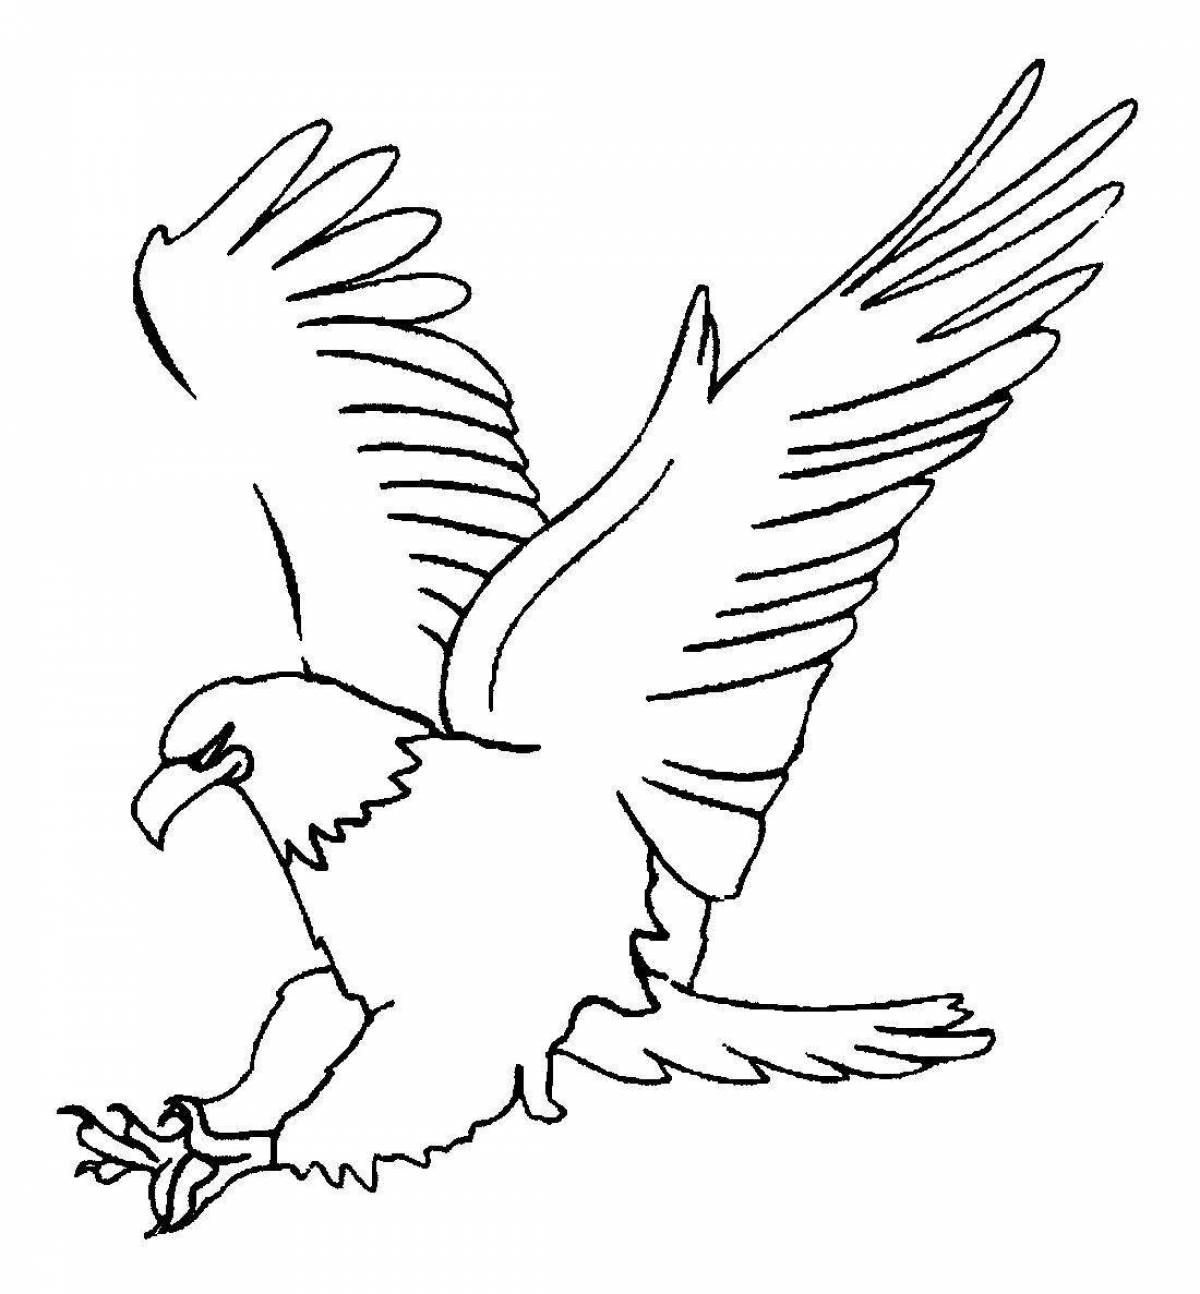 Colourful eagle coloring page